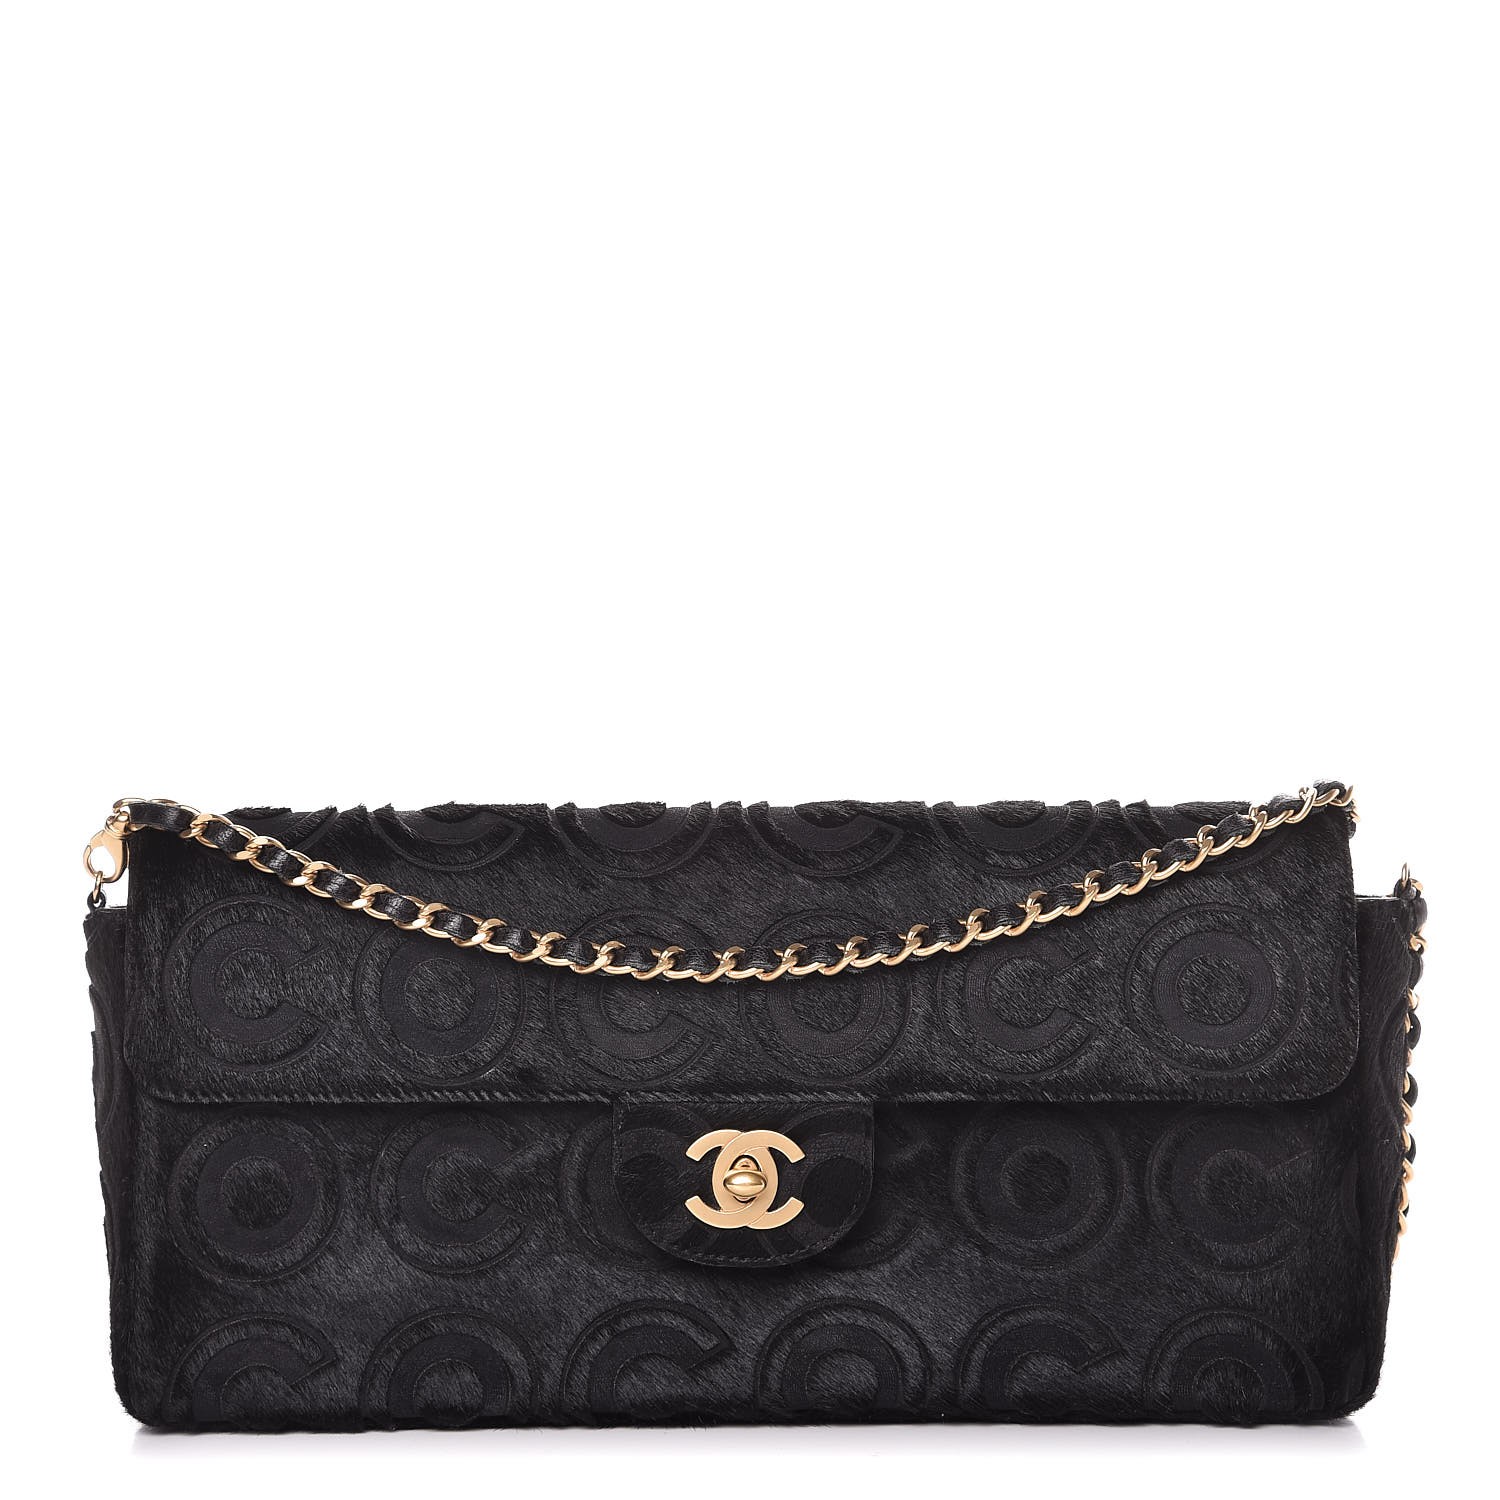 CHANEL Pony Hair Coco East West Flap Black 330595